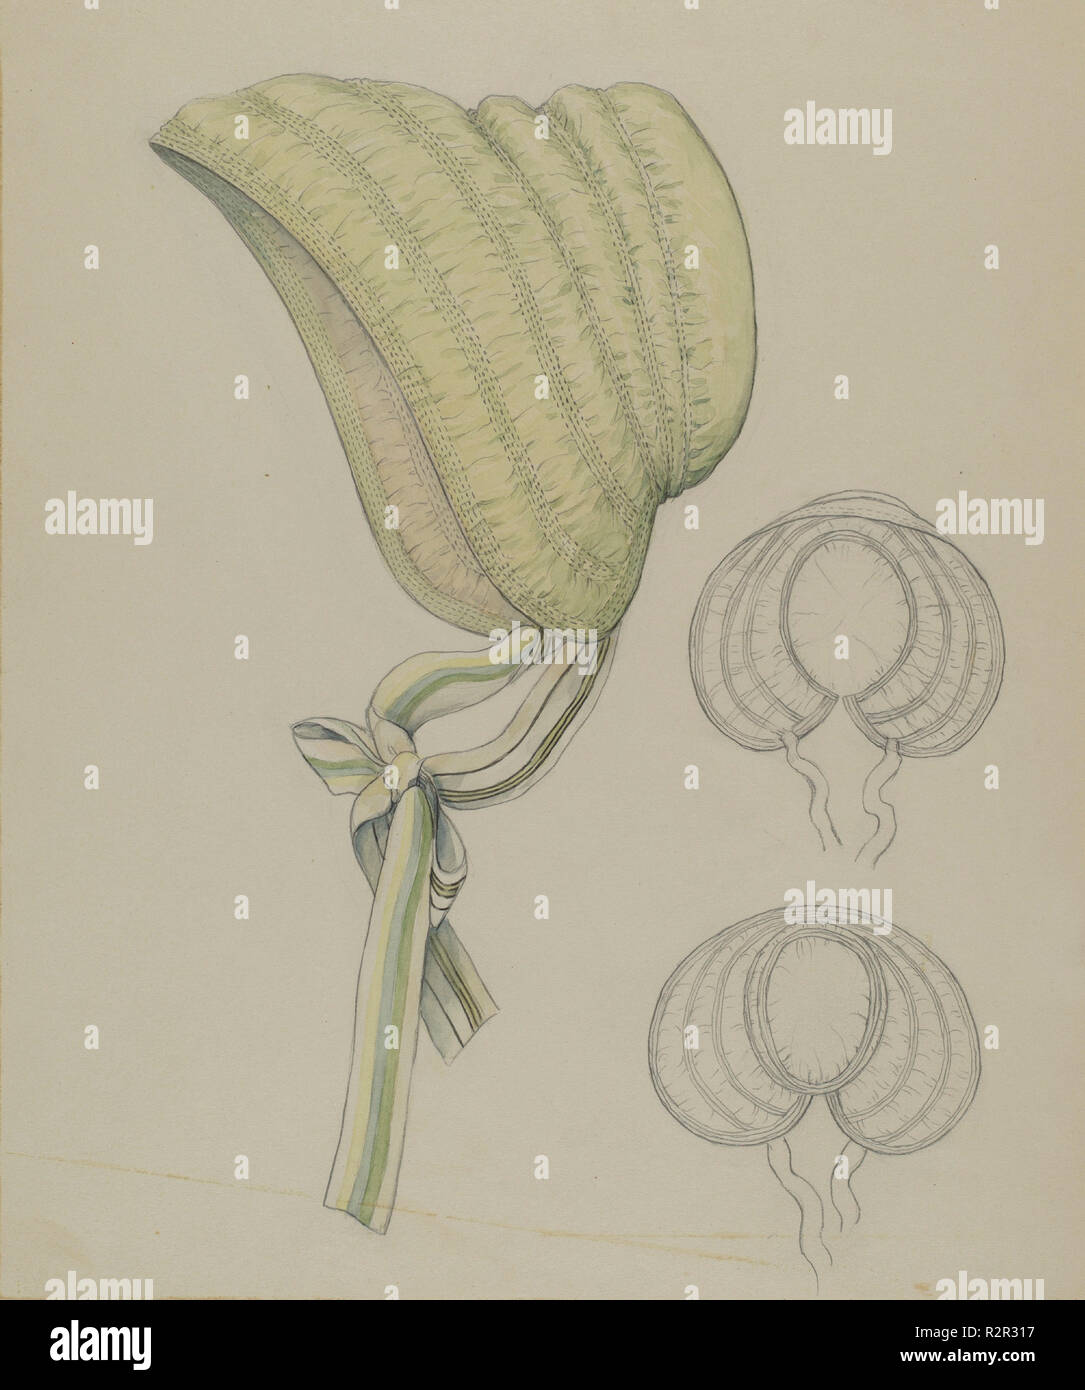 Bonnet. Dated: c. 1936. Dimensions: overall: 29.3 x 23.1 cm (11 9/16 x 9 1/8 in.). Medium: watercolor and graphite on paperboard. Museum: National Gallery of Art, Washington DC. Author: Jessie M. Benge. Stock Photo